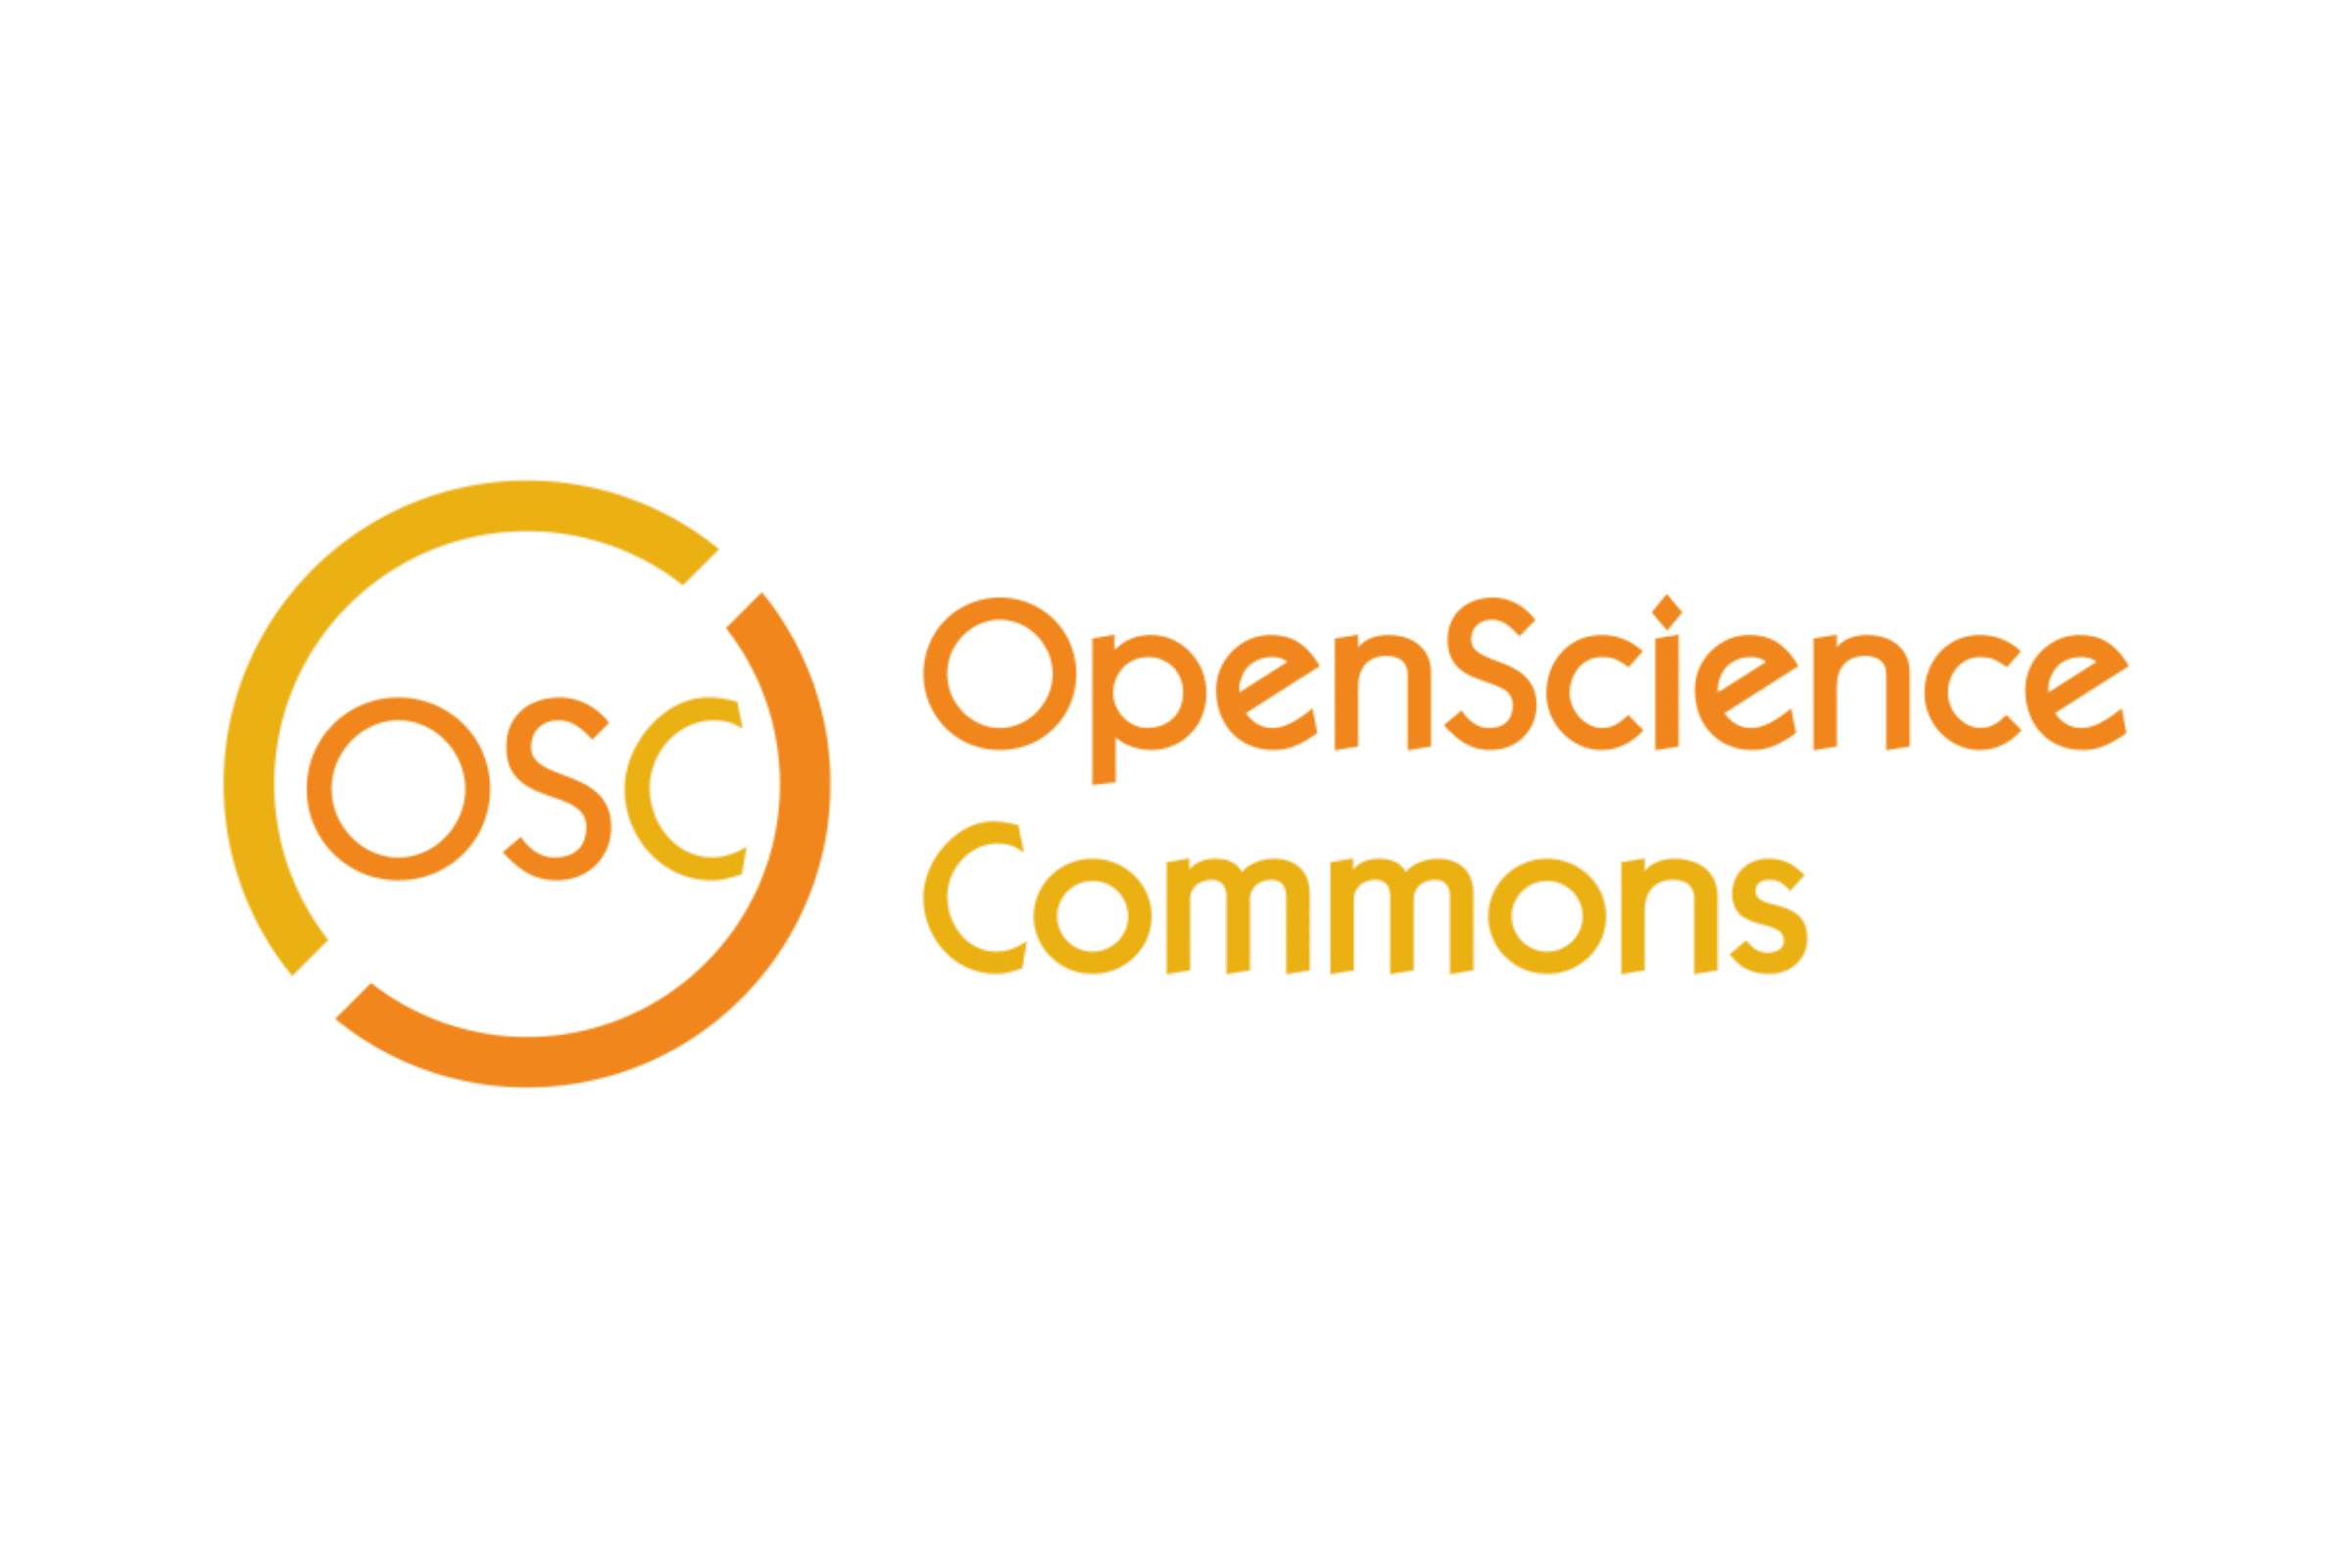 Logo of the Open Science Commons policy initiative